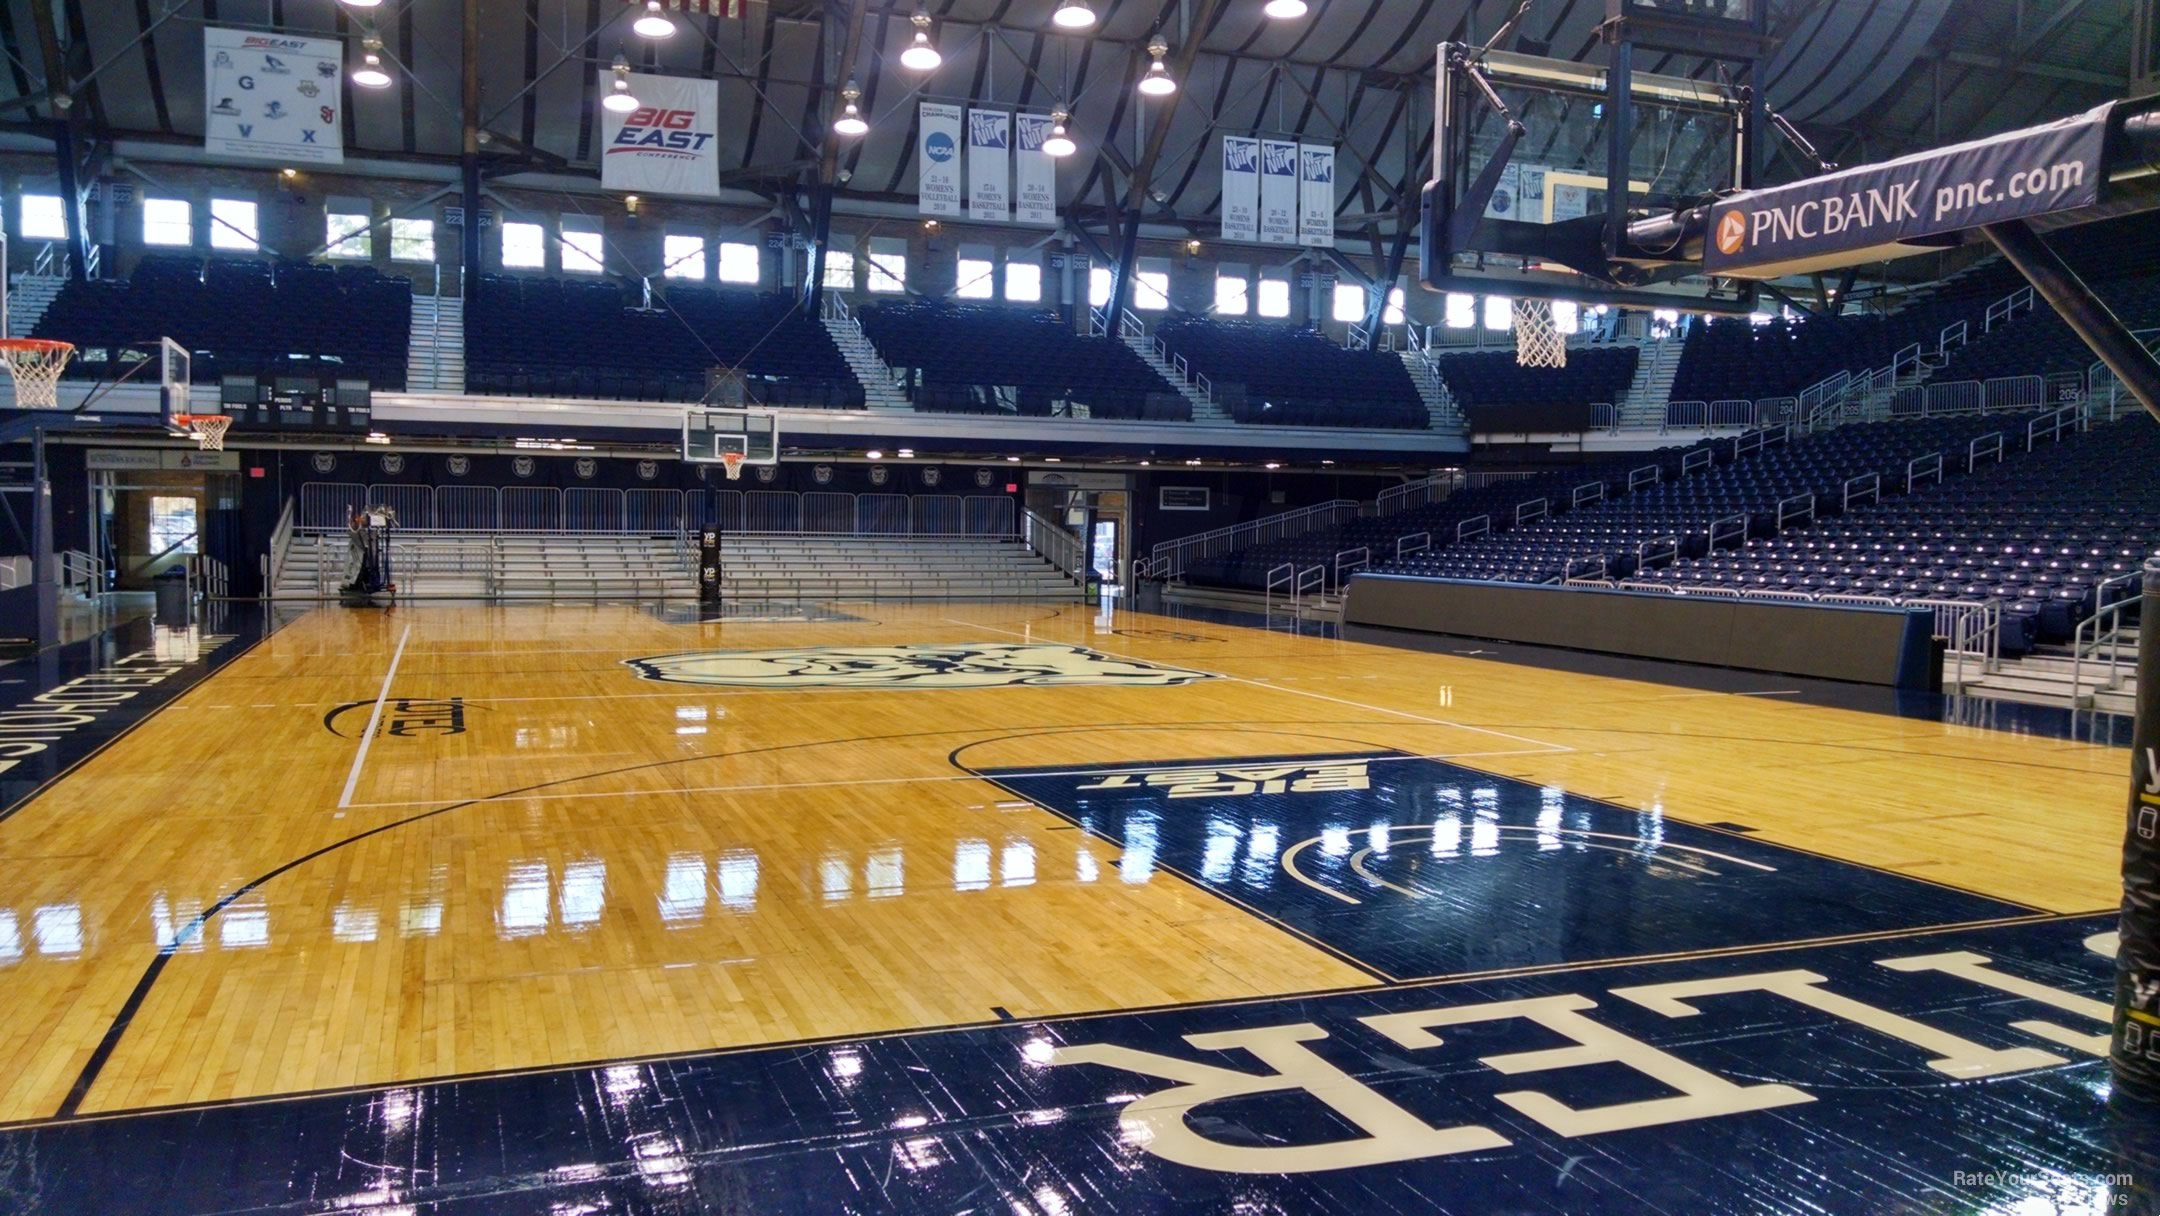 section 112, row 3 seat view  - hinkle fieldhouse